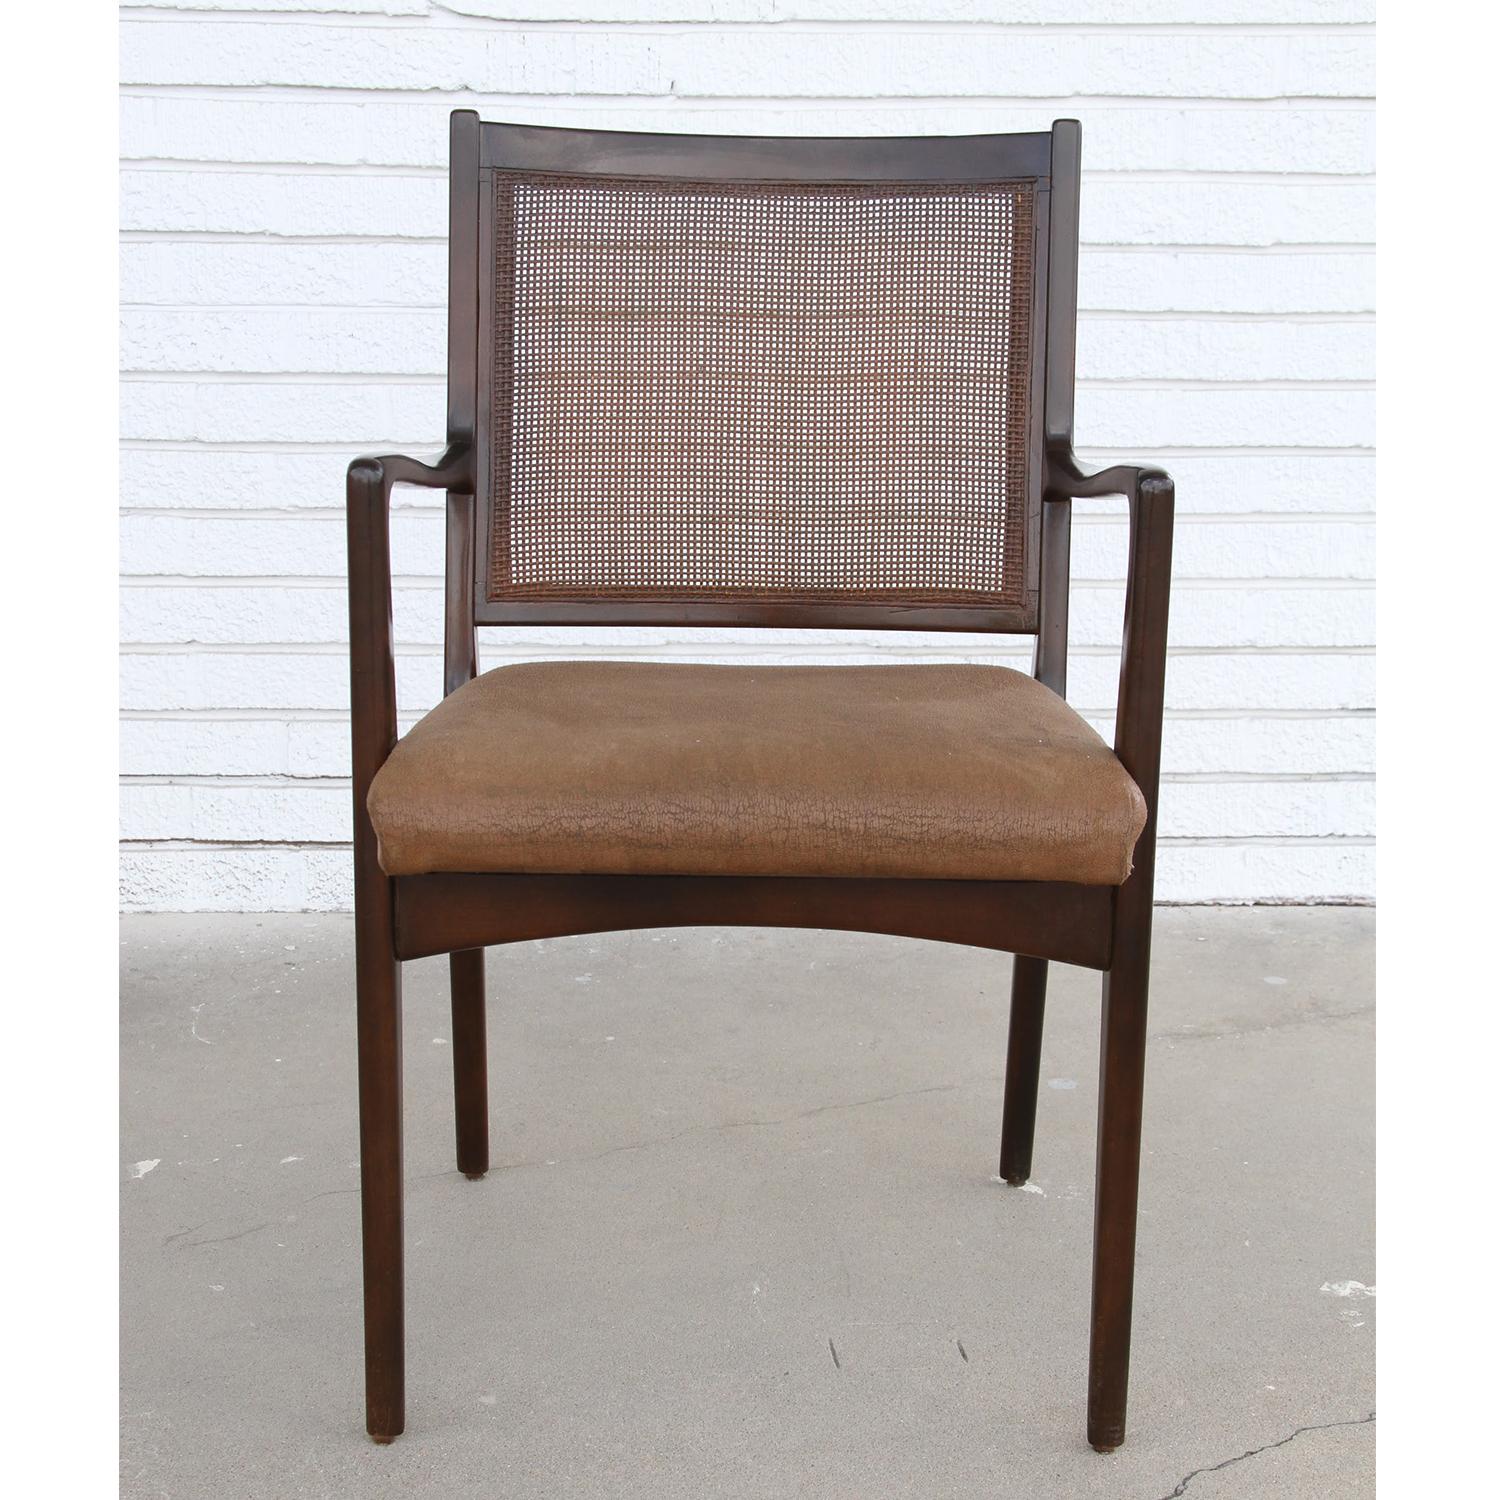 Set of 6 Swedish dining chairs Attributed to Karl Erik Ekselius in teak and cane

Karl-Erik Ekselius (1914-1998) was trained as a cabinet maker and was a student of Carl Malmsten. His designs are invested in modern Danish design of the time yet